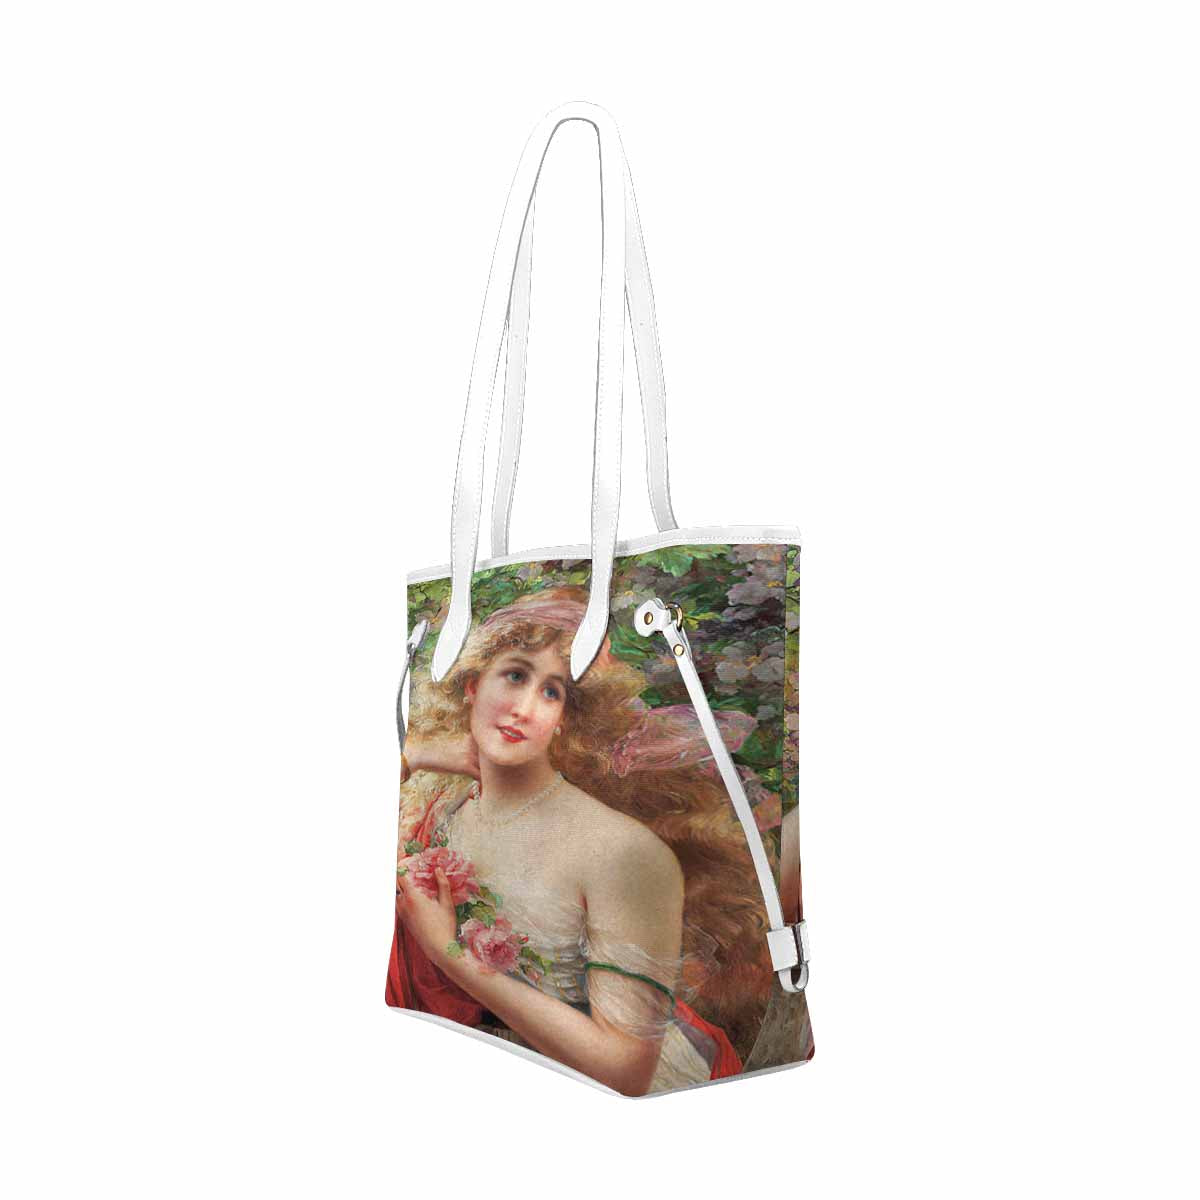 Victorian Lady Design Handbag, Model 1695361, Model 1695361, Young Lady With Roses, WHITE TRIM